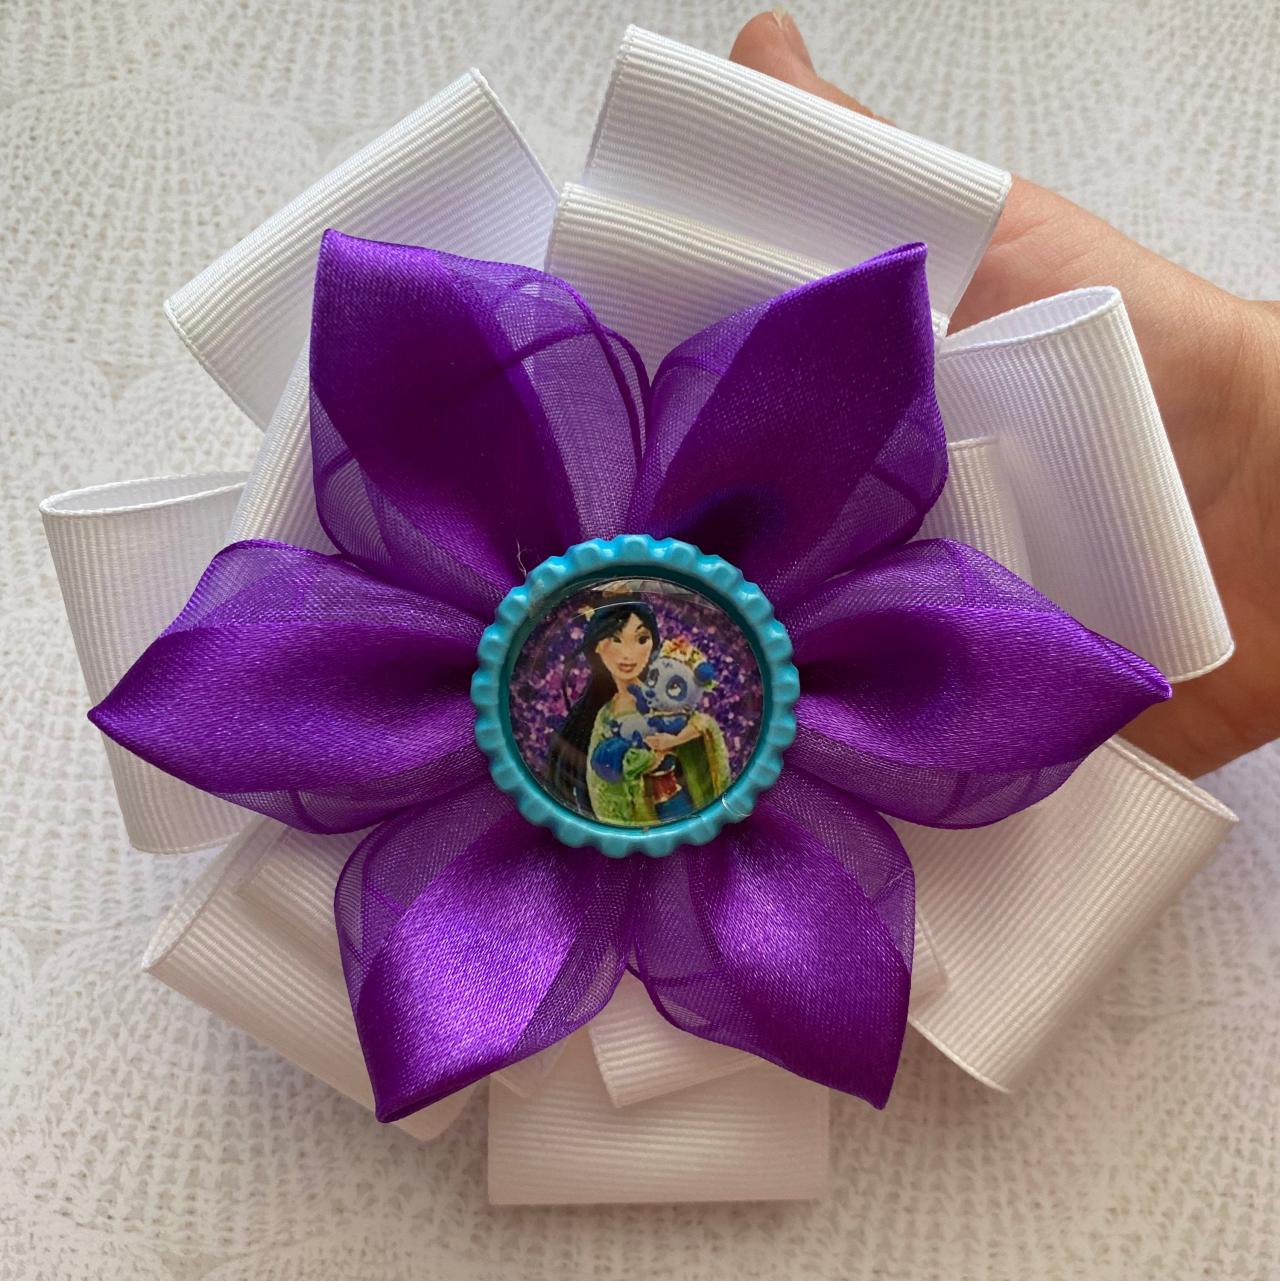 Mulan inspired hair bow in purple with white